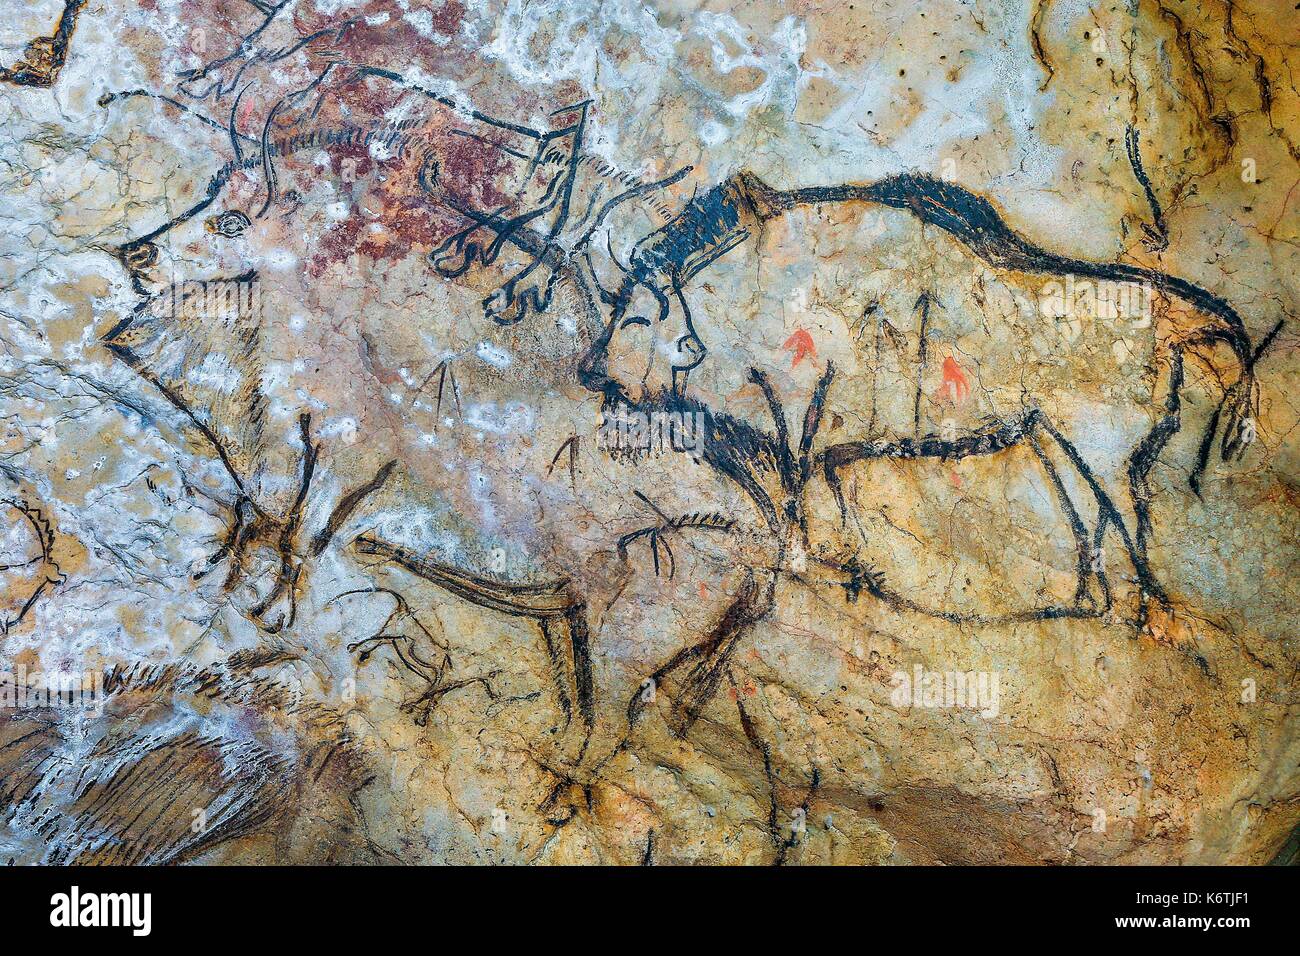 France, Ariege, listed at Great Tourist Sites in Midi Pyrenees, Regional Park Ariege Pyrenees, Niaux, Niaux cavern, Niaux cave paintings Stock Photo